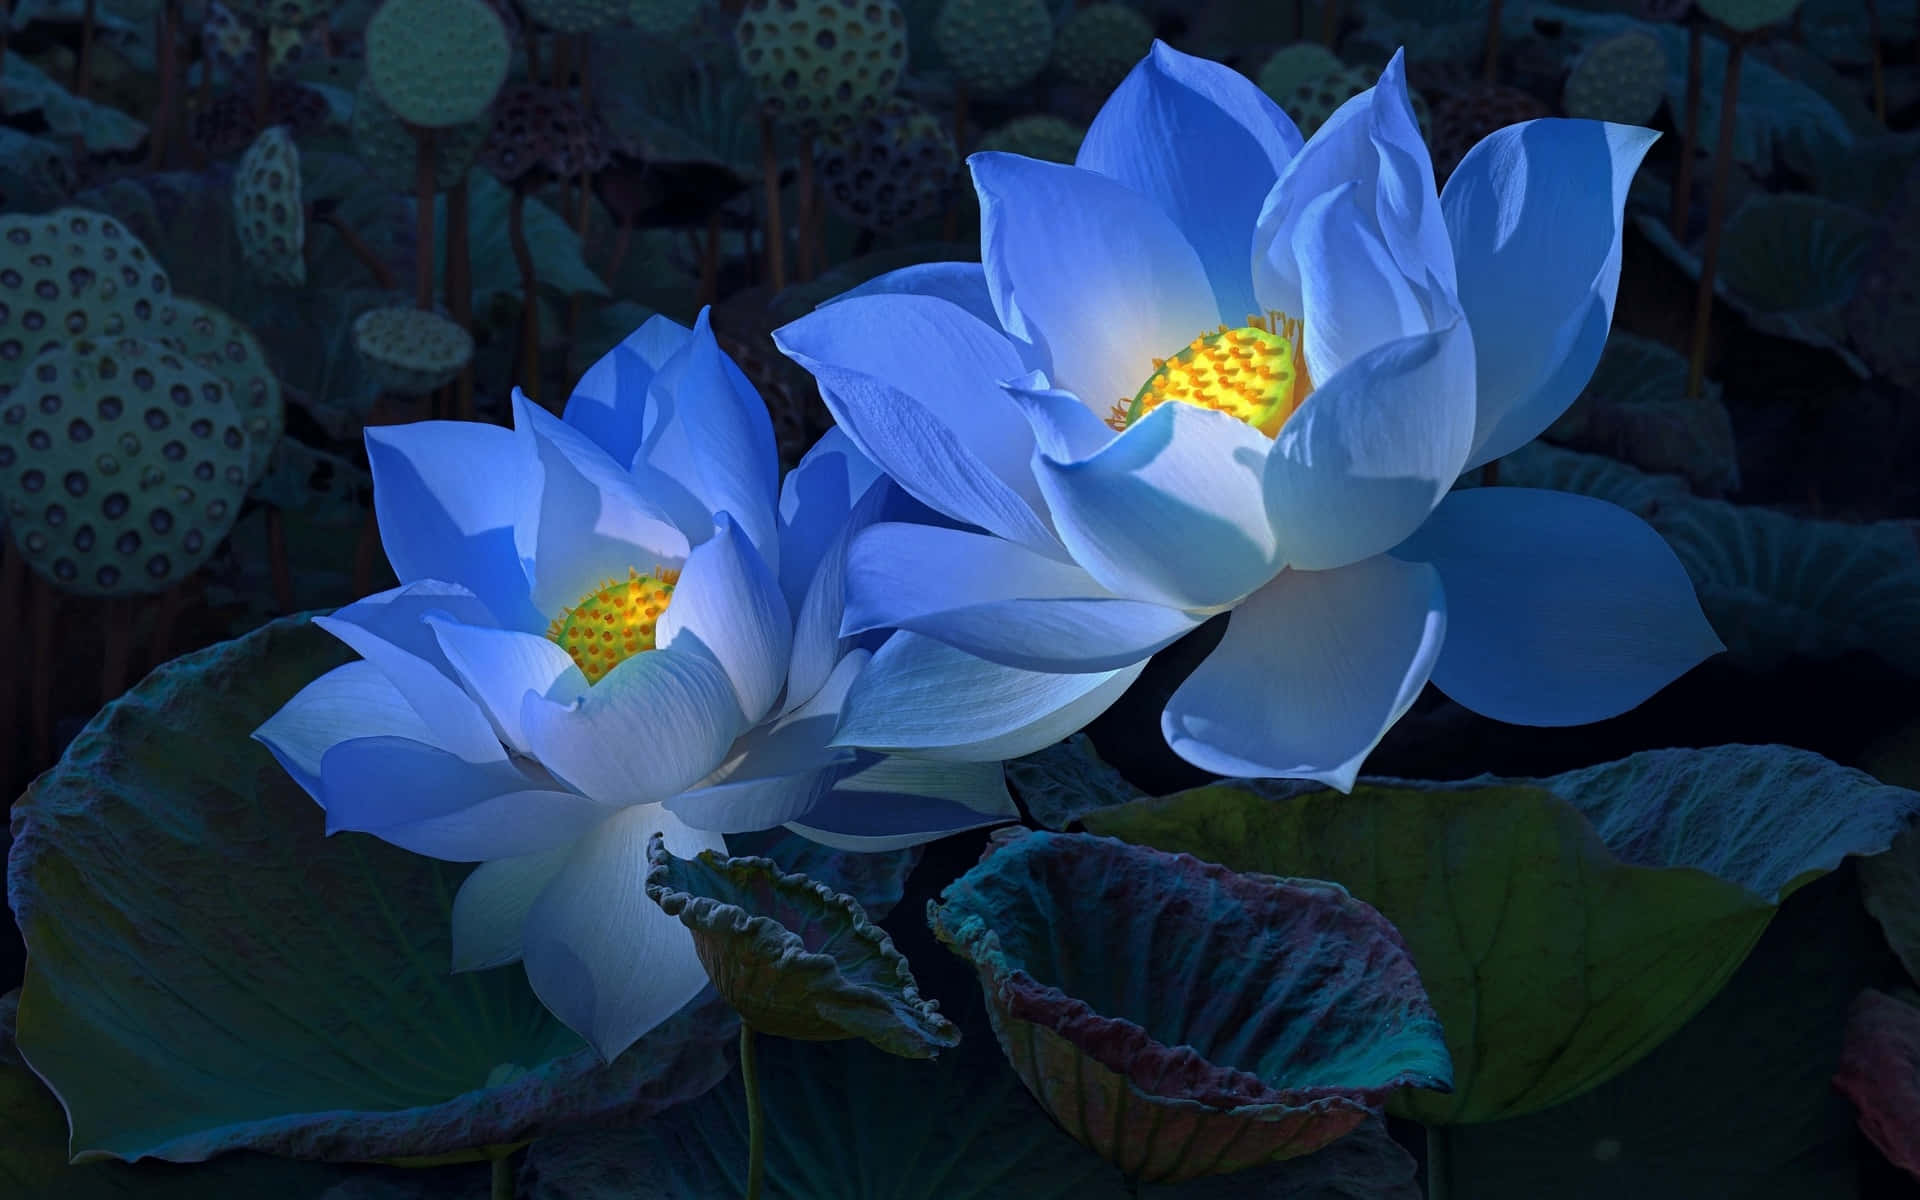 Download A gorgeous and serene lotus flower in bloom. | Wallpapers.com